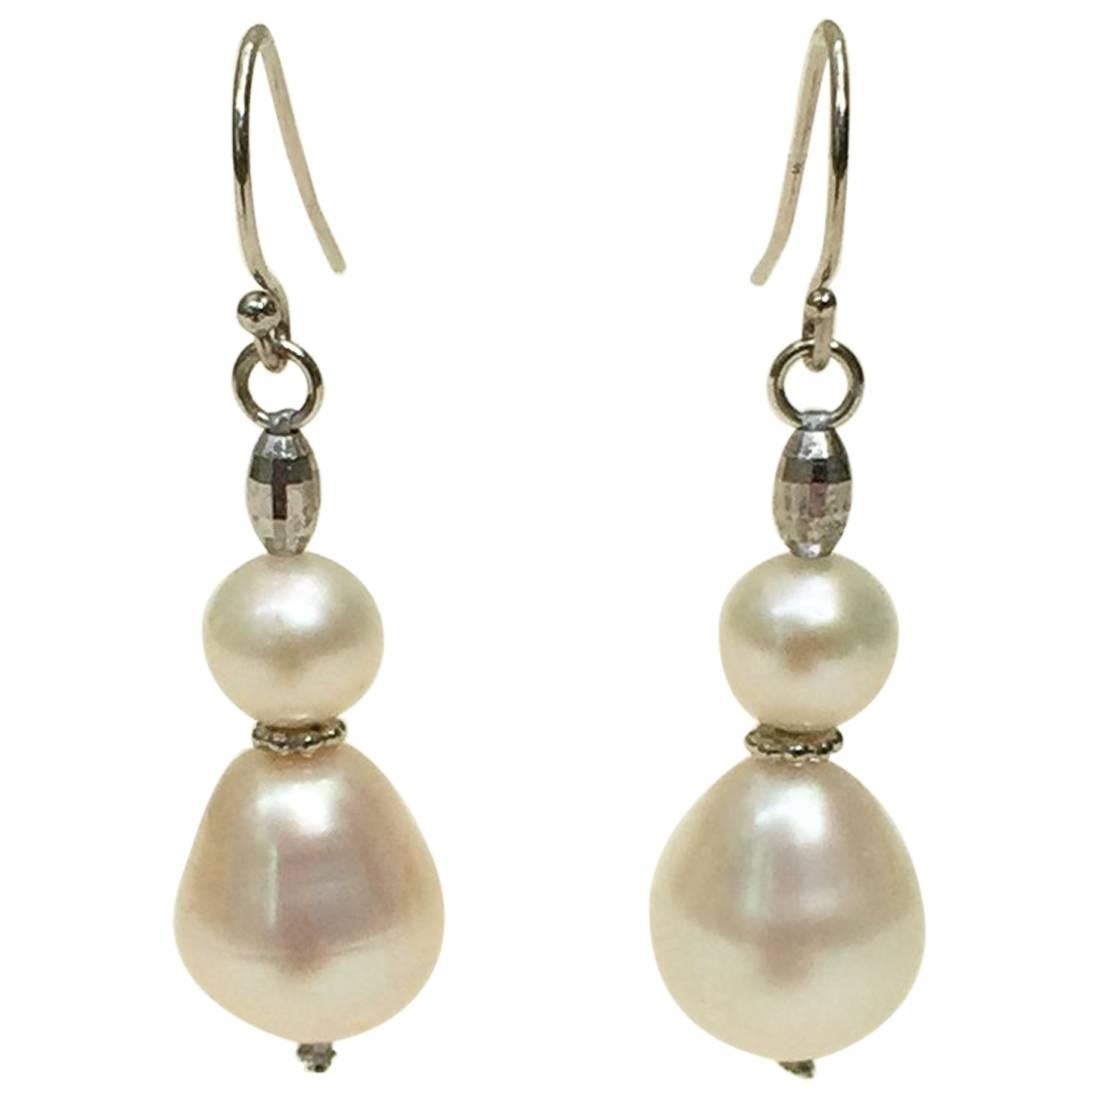 Double Pearl Earrings with Platinum Plated Silver Beads by Marina J.